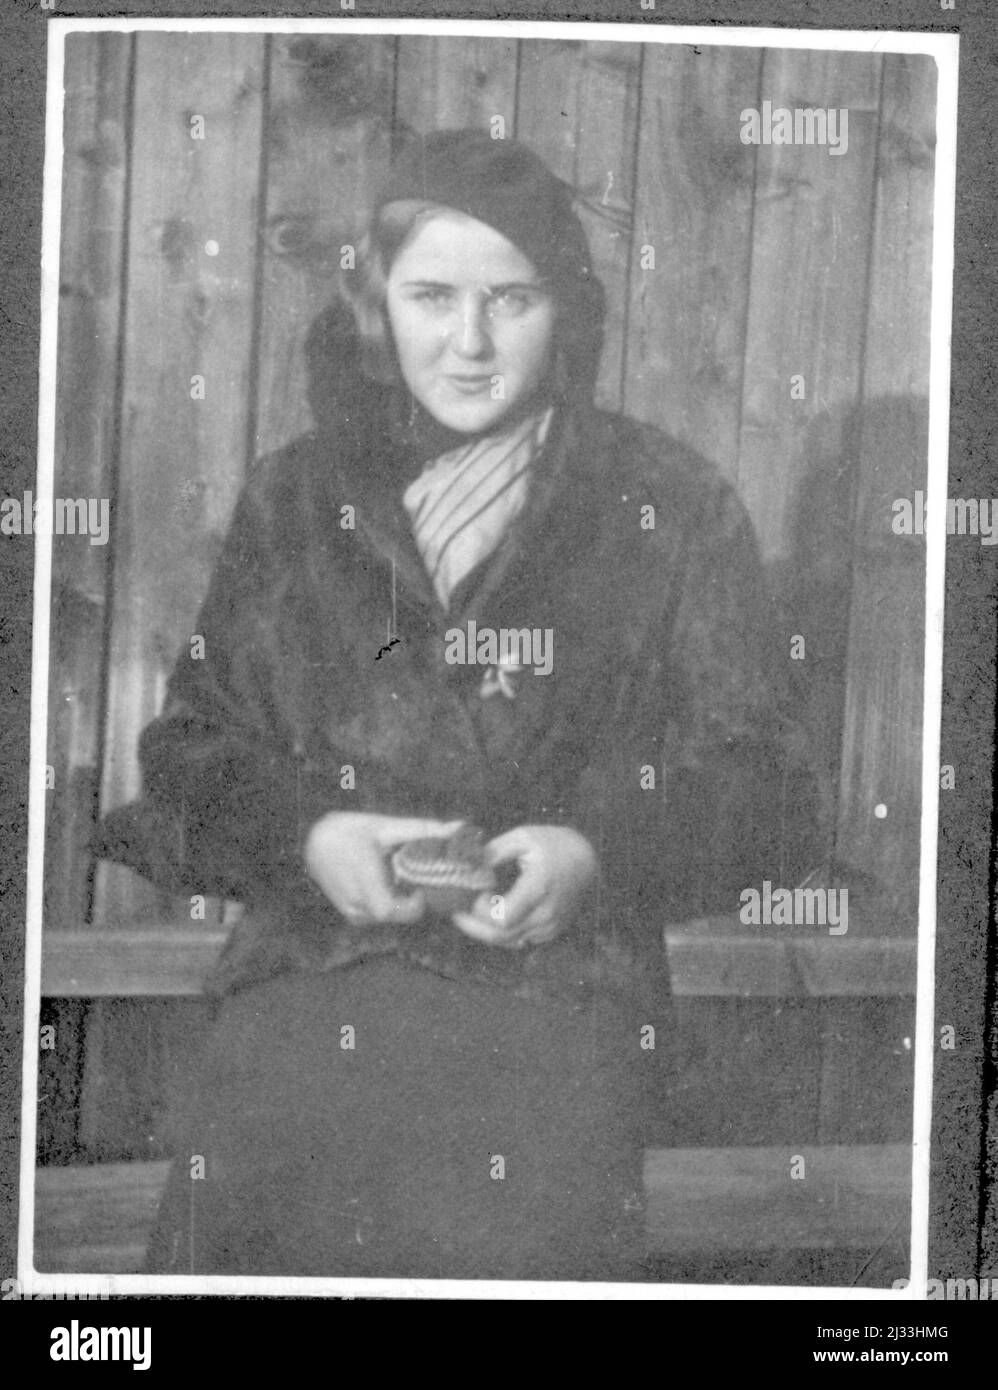 Ich. Eva Braun's Photo Albums, ca. 1913 - ca. 1944. These albums are attributed to Eva Braun (four are claimed by her friend Herta Schneider, nee Ostermeyer) and document her life from ca. 1913 to 1944. There are many photographs of Eva, her sisters and their children, Herta Schneider and her children, as well as photographs of Eva's vacations, family members and friends. Included also are photographs taken by and of Eva Braun at Hitler's chalet Berghof (or Kehlstein), photographs of Hitler and his entourage, visitors to Berghof and the scenery around Berchtesgaden, and some studio portraits o Stock Photo